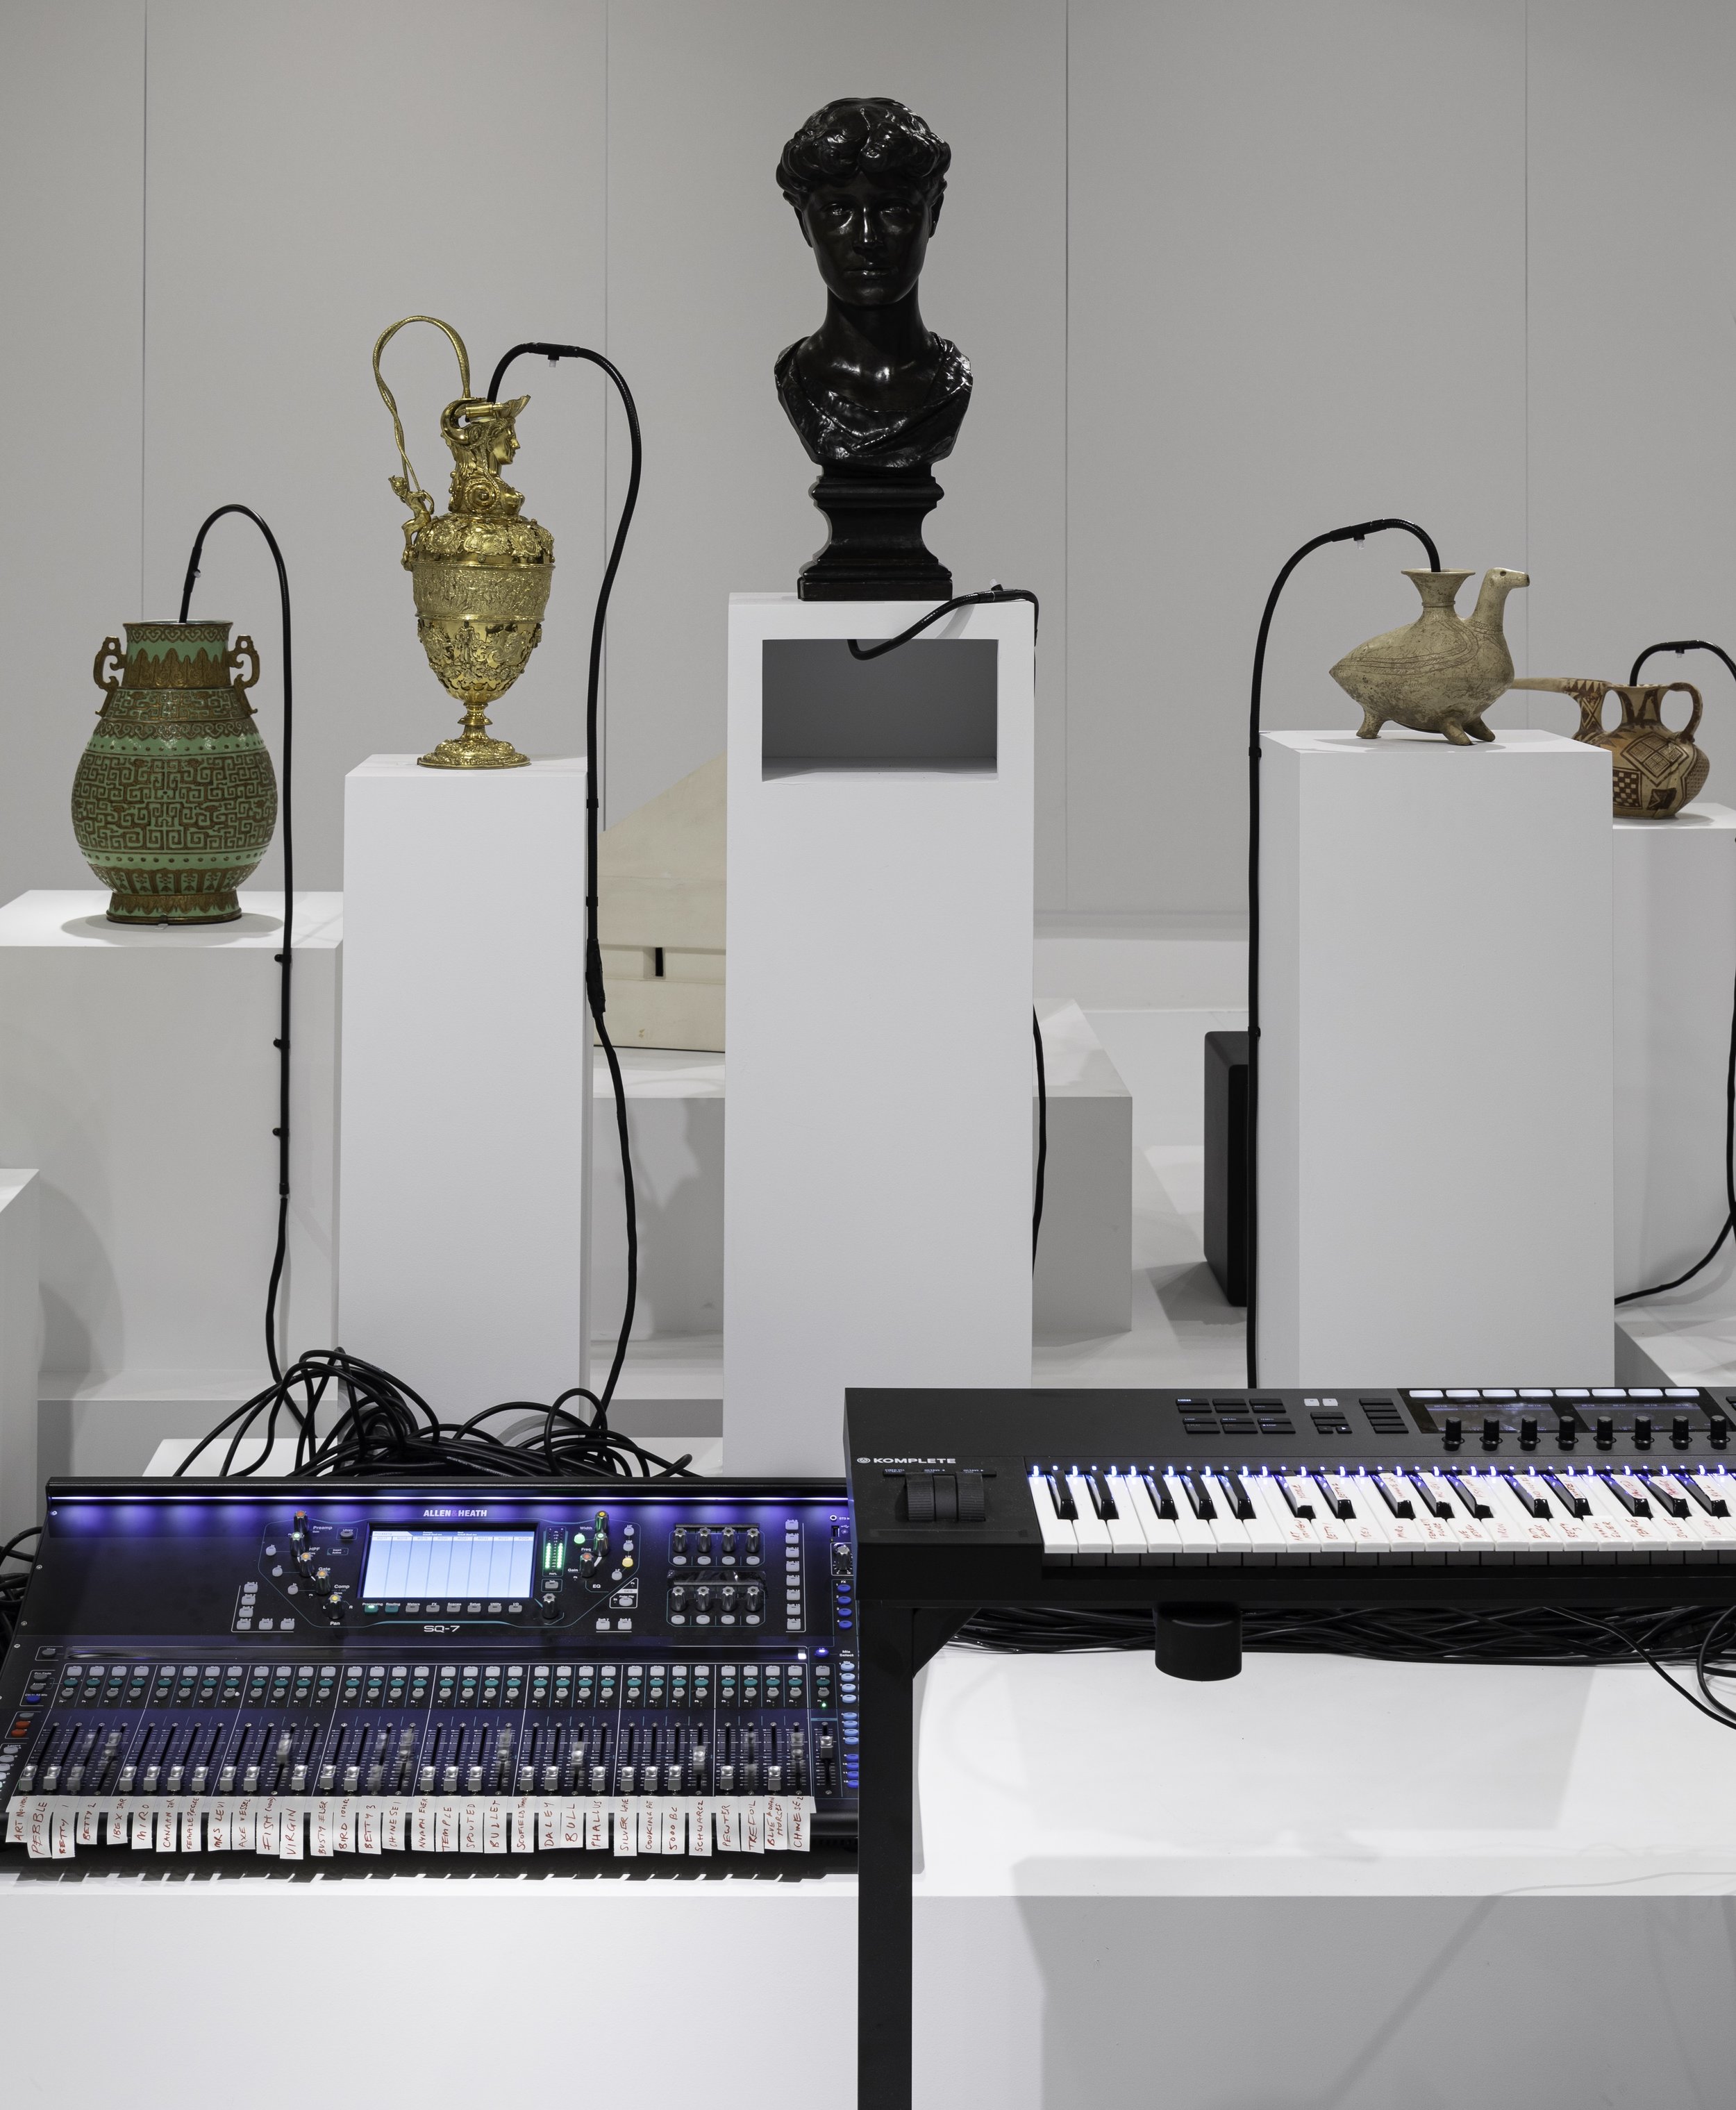  Installation view of Oliver Beer: Vessel Orchestra at The Metropolitan Museum of Art © Metropolitan Museum of Art 2019, Photography by Wilson Santiago 